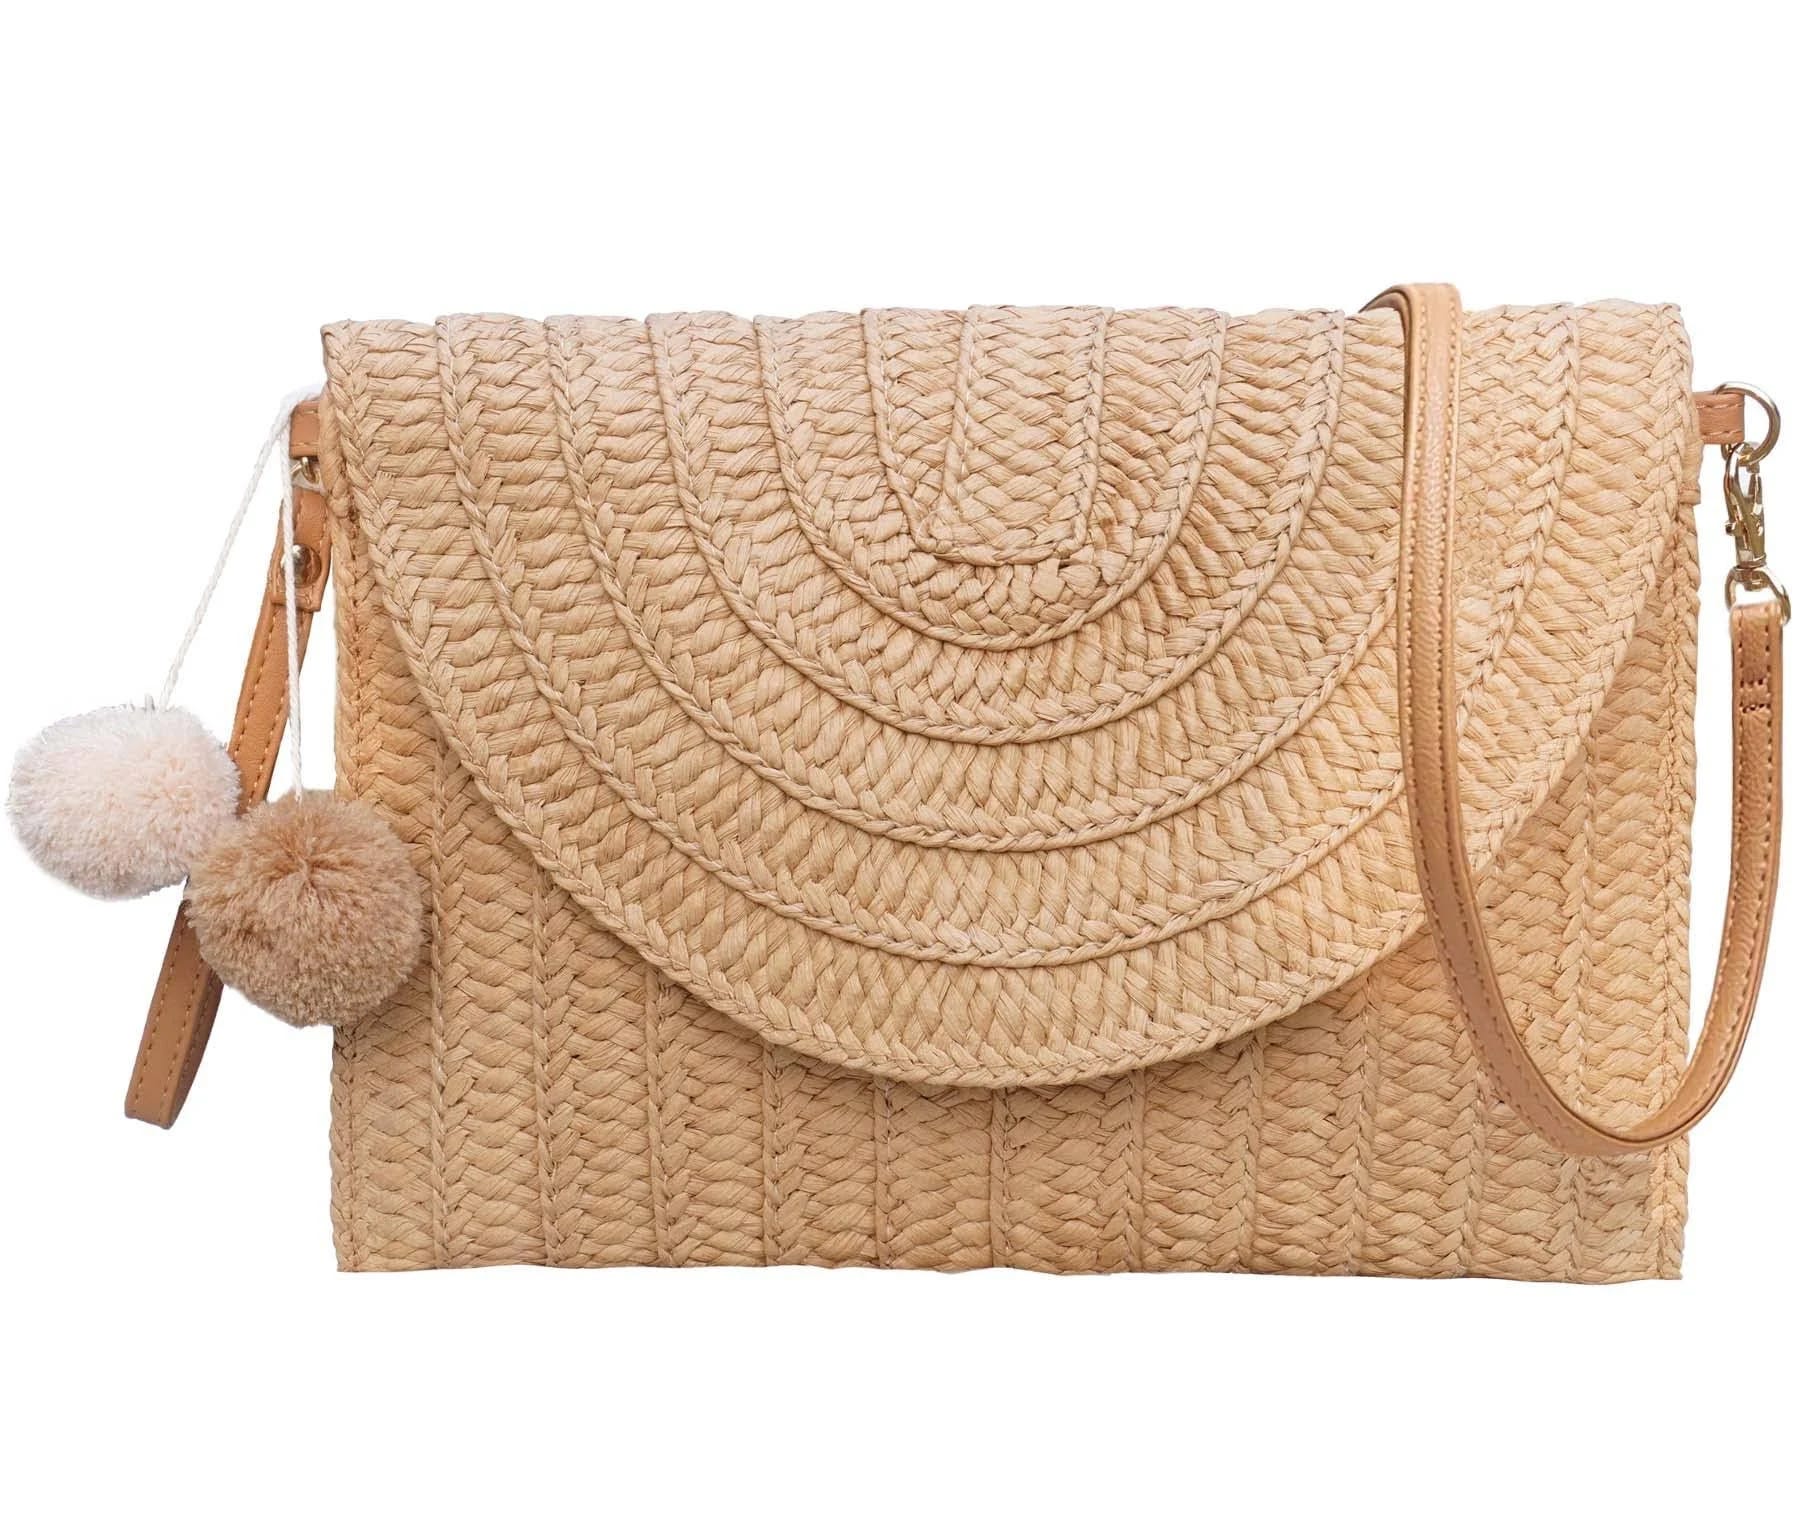 Fashionable Straw Clutch Bag with Adjustable Strap | Image